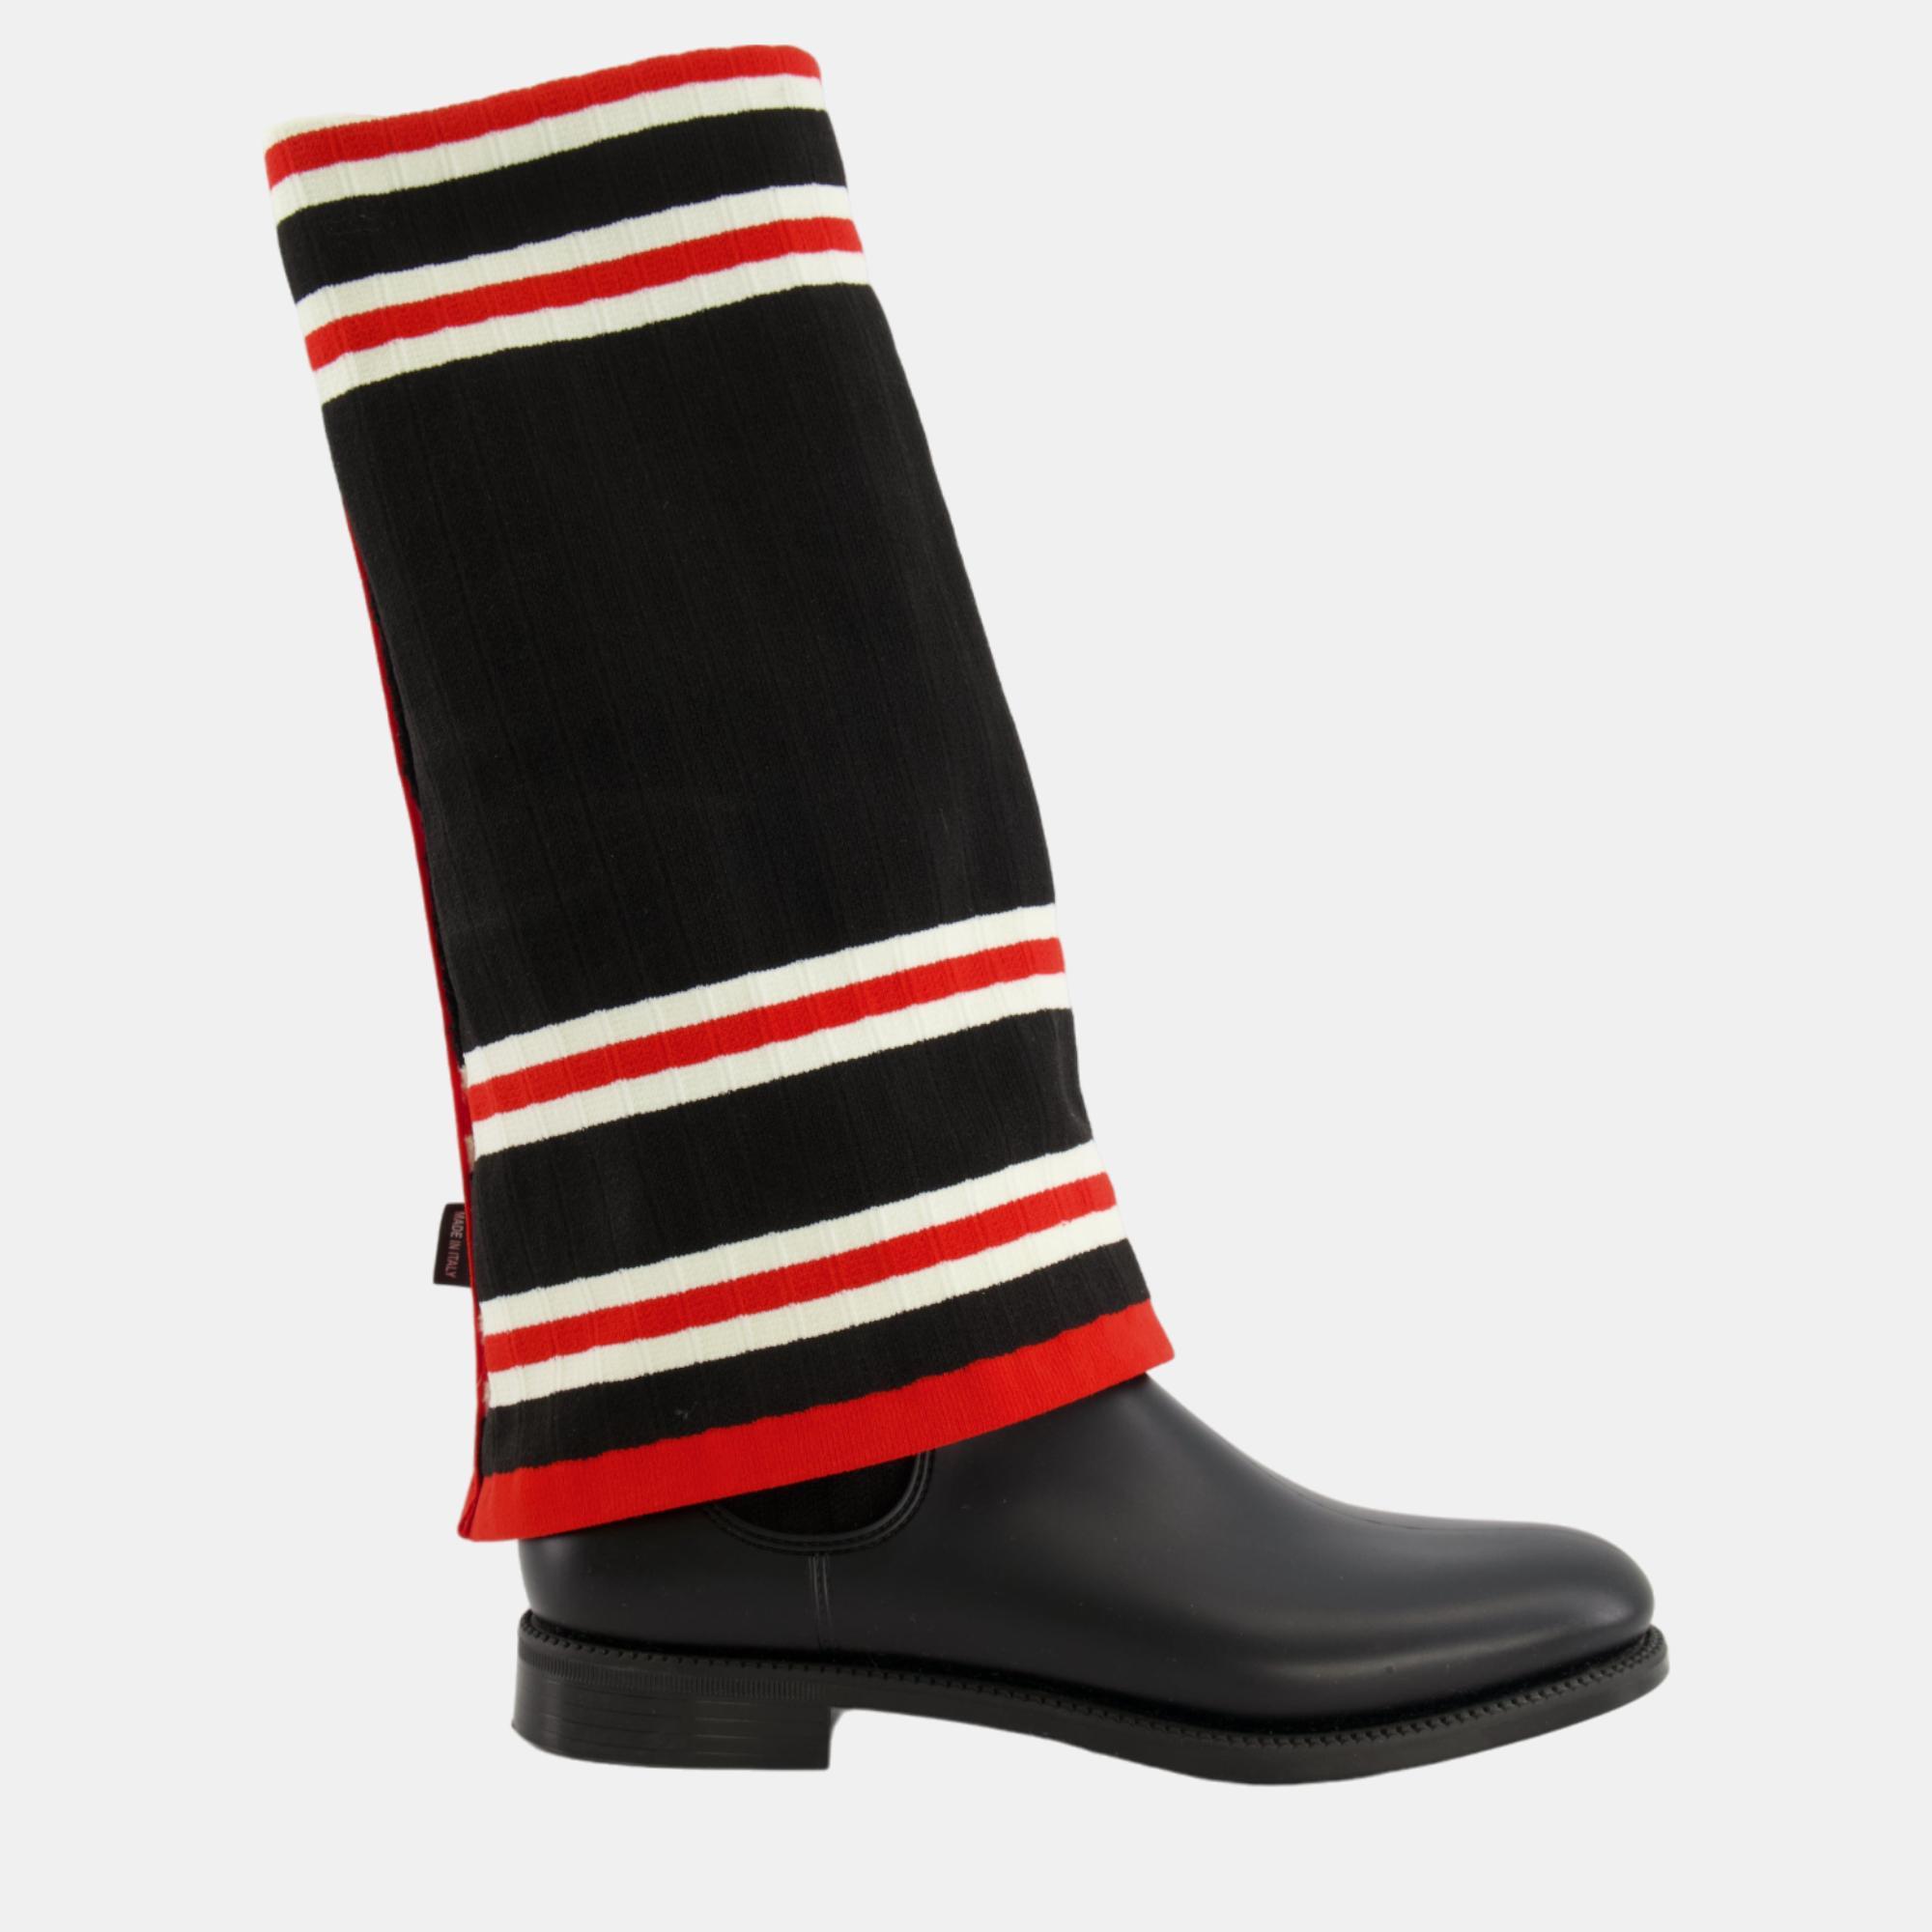 Givenchy black, red and white striped sock boots size eu 39